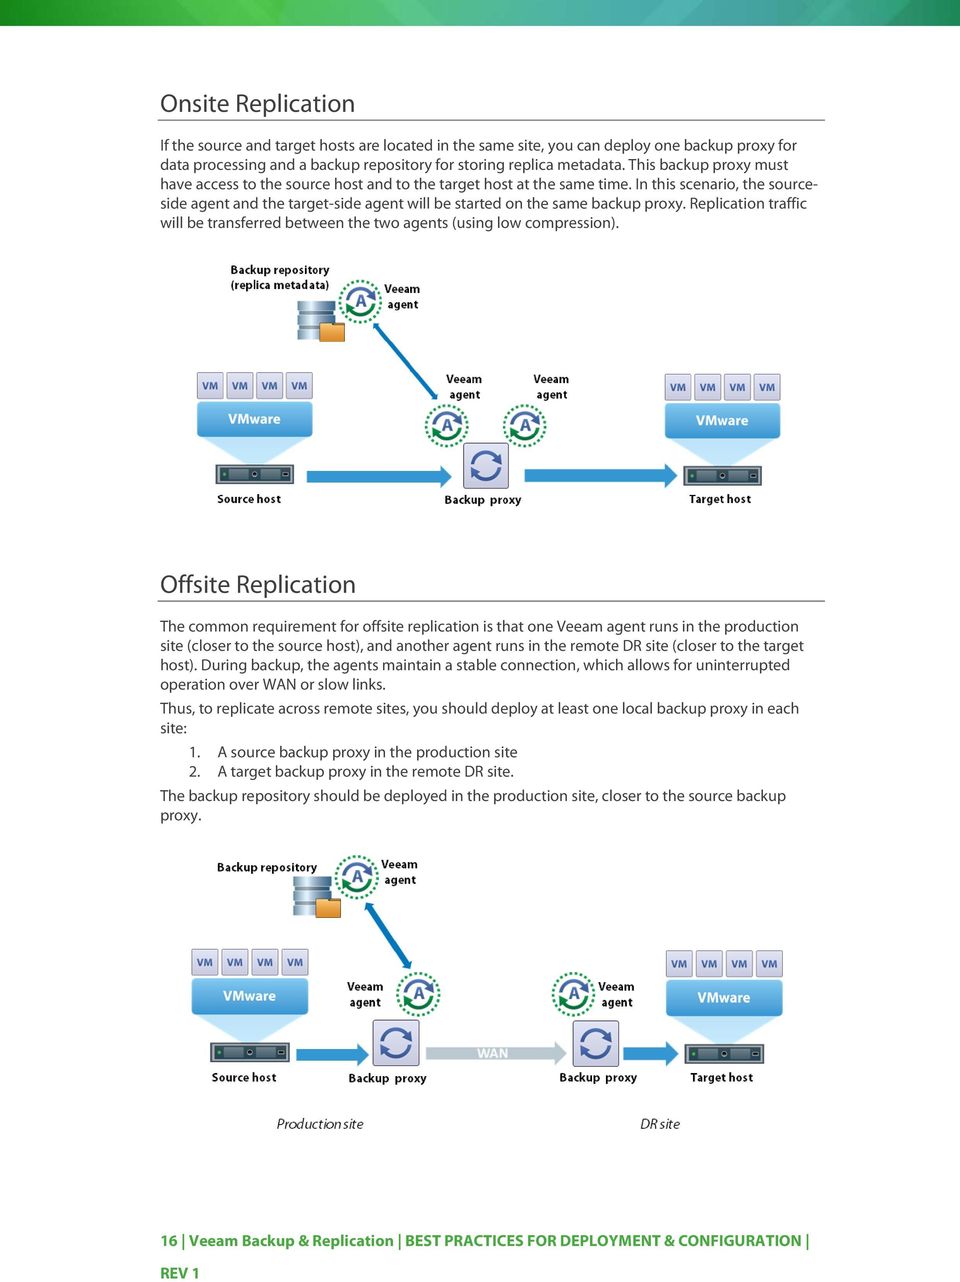 In this scenario, the sourceside agent and the target-side agent will be started on the same backup proxy. Replication traffic will be transferred between the two agents (using low compression).